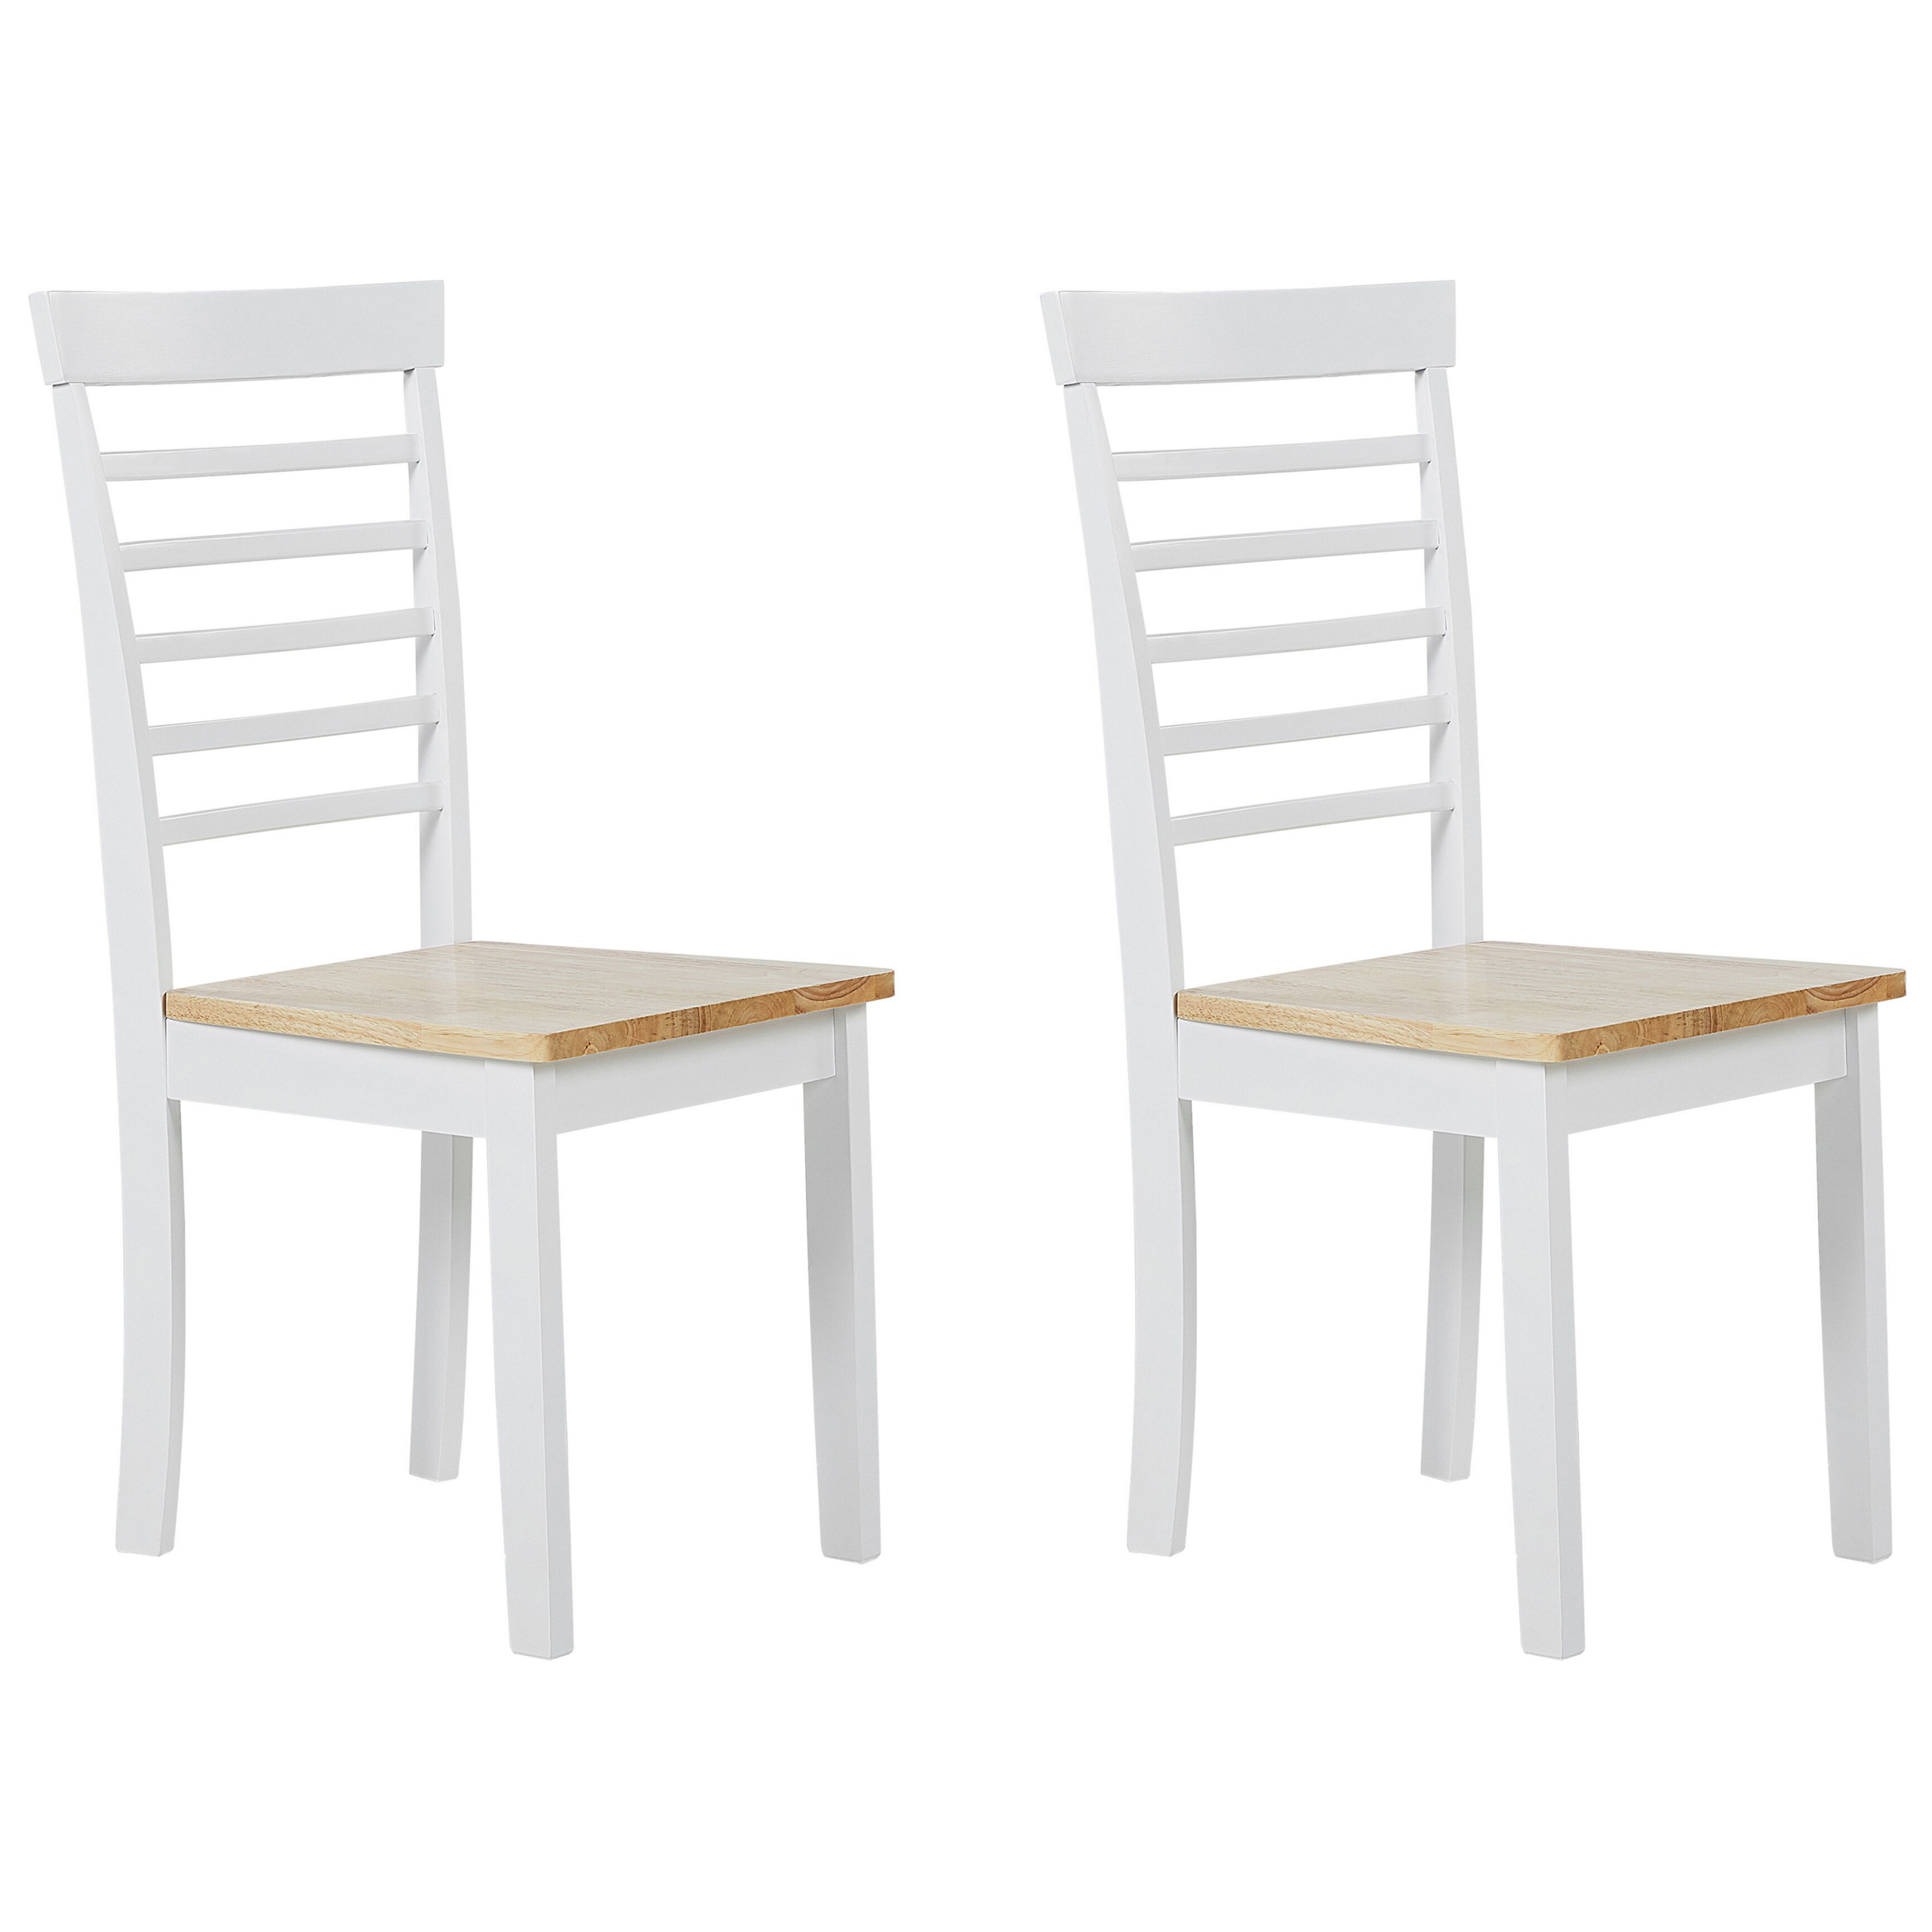 Beliani Set of 2 Dining Chairs Light Wood and White Rubber Wood Amrless Seat Ladder Back